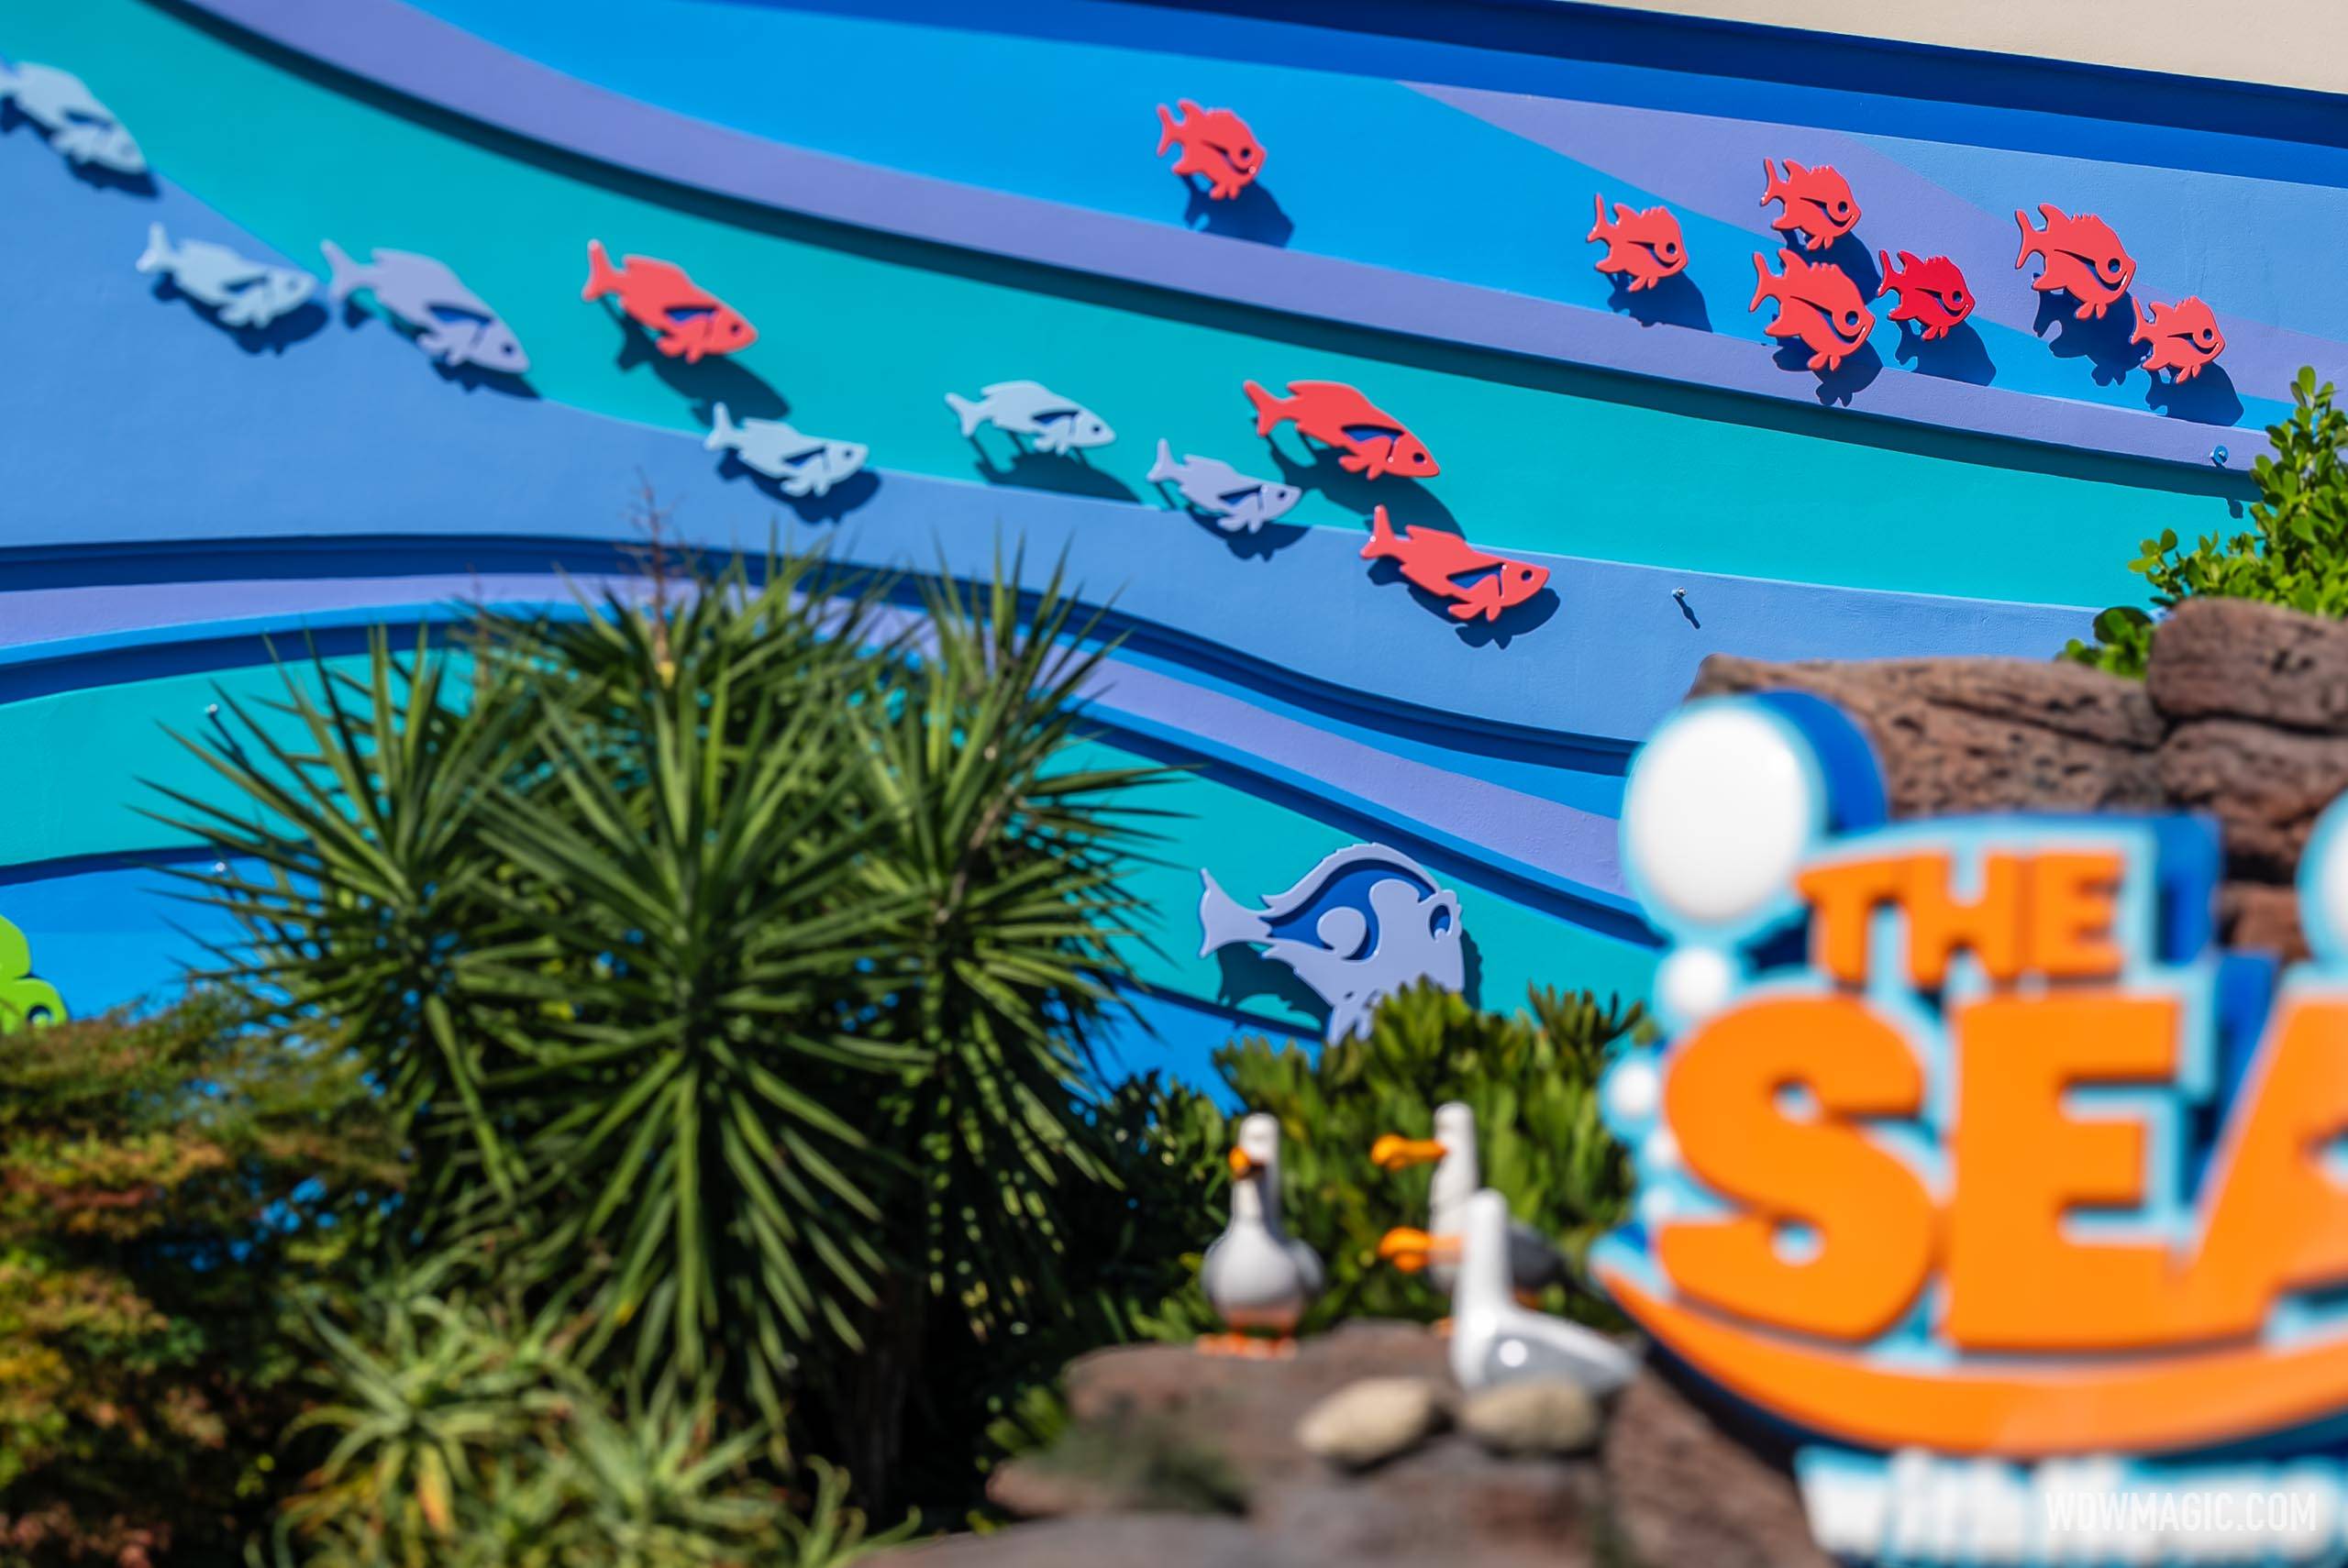 Exterior refurbishment at The Seas with Nemo and Friends - November 21 2023